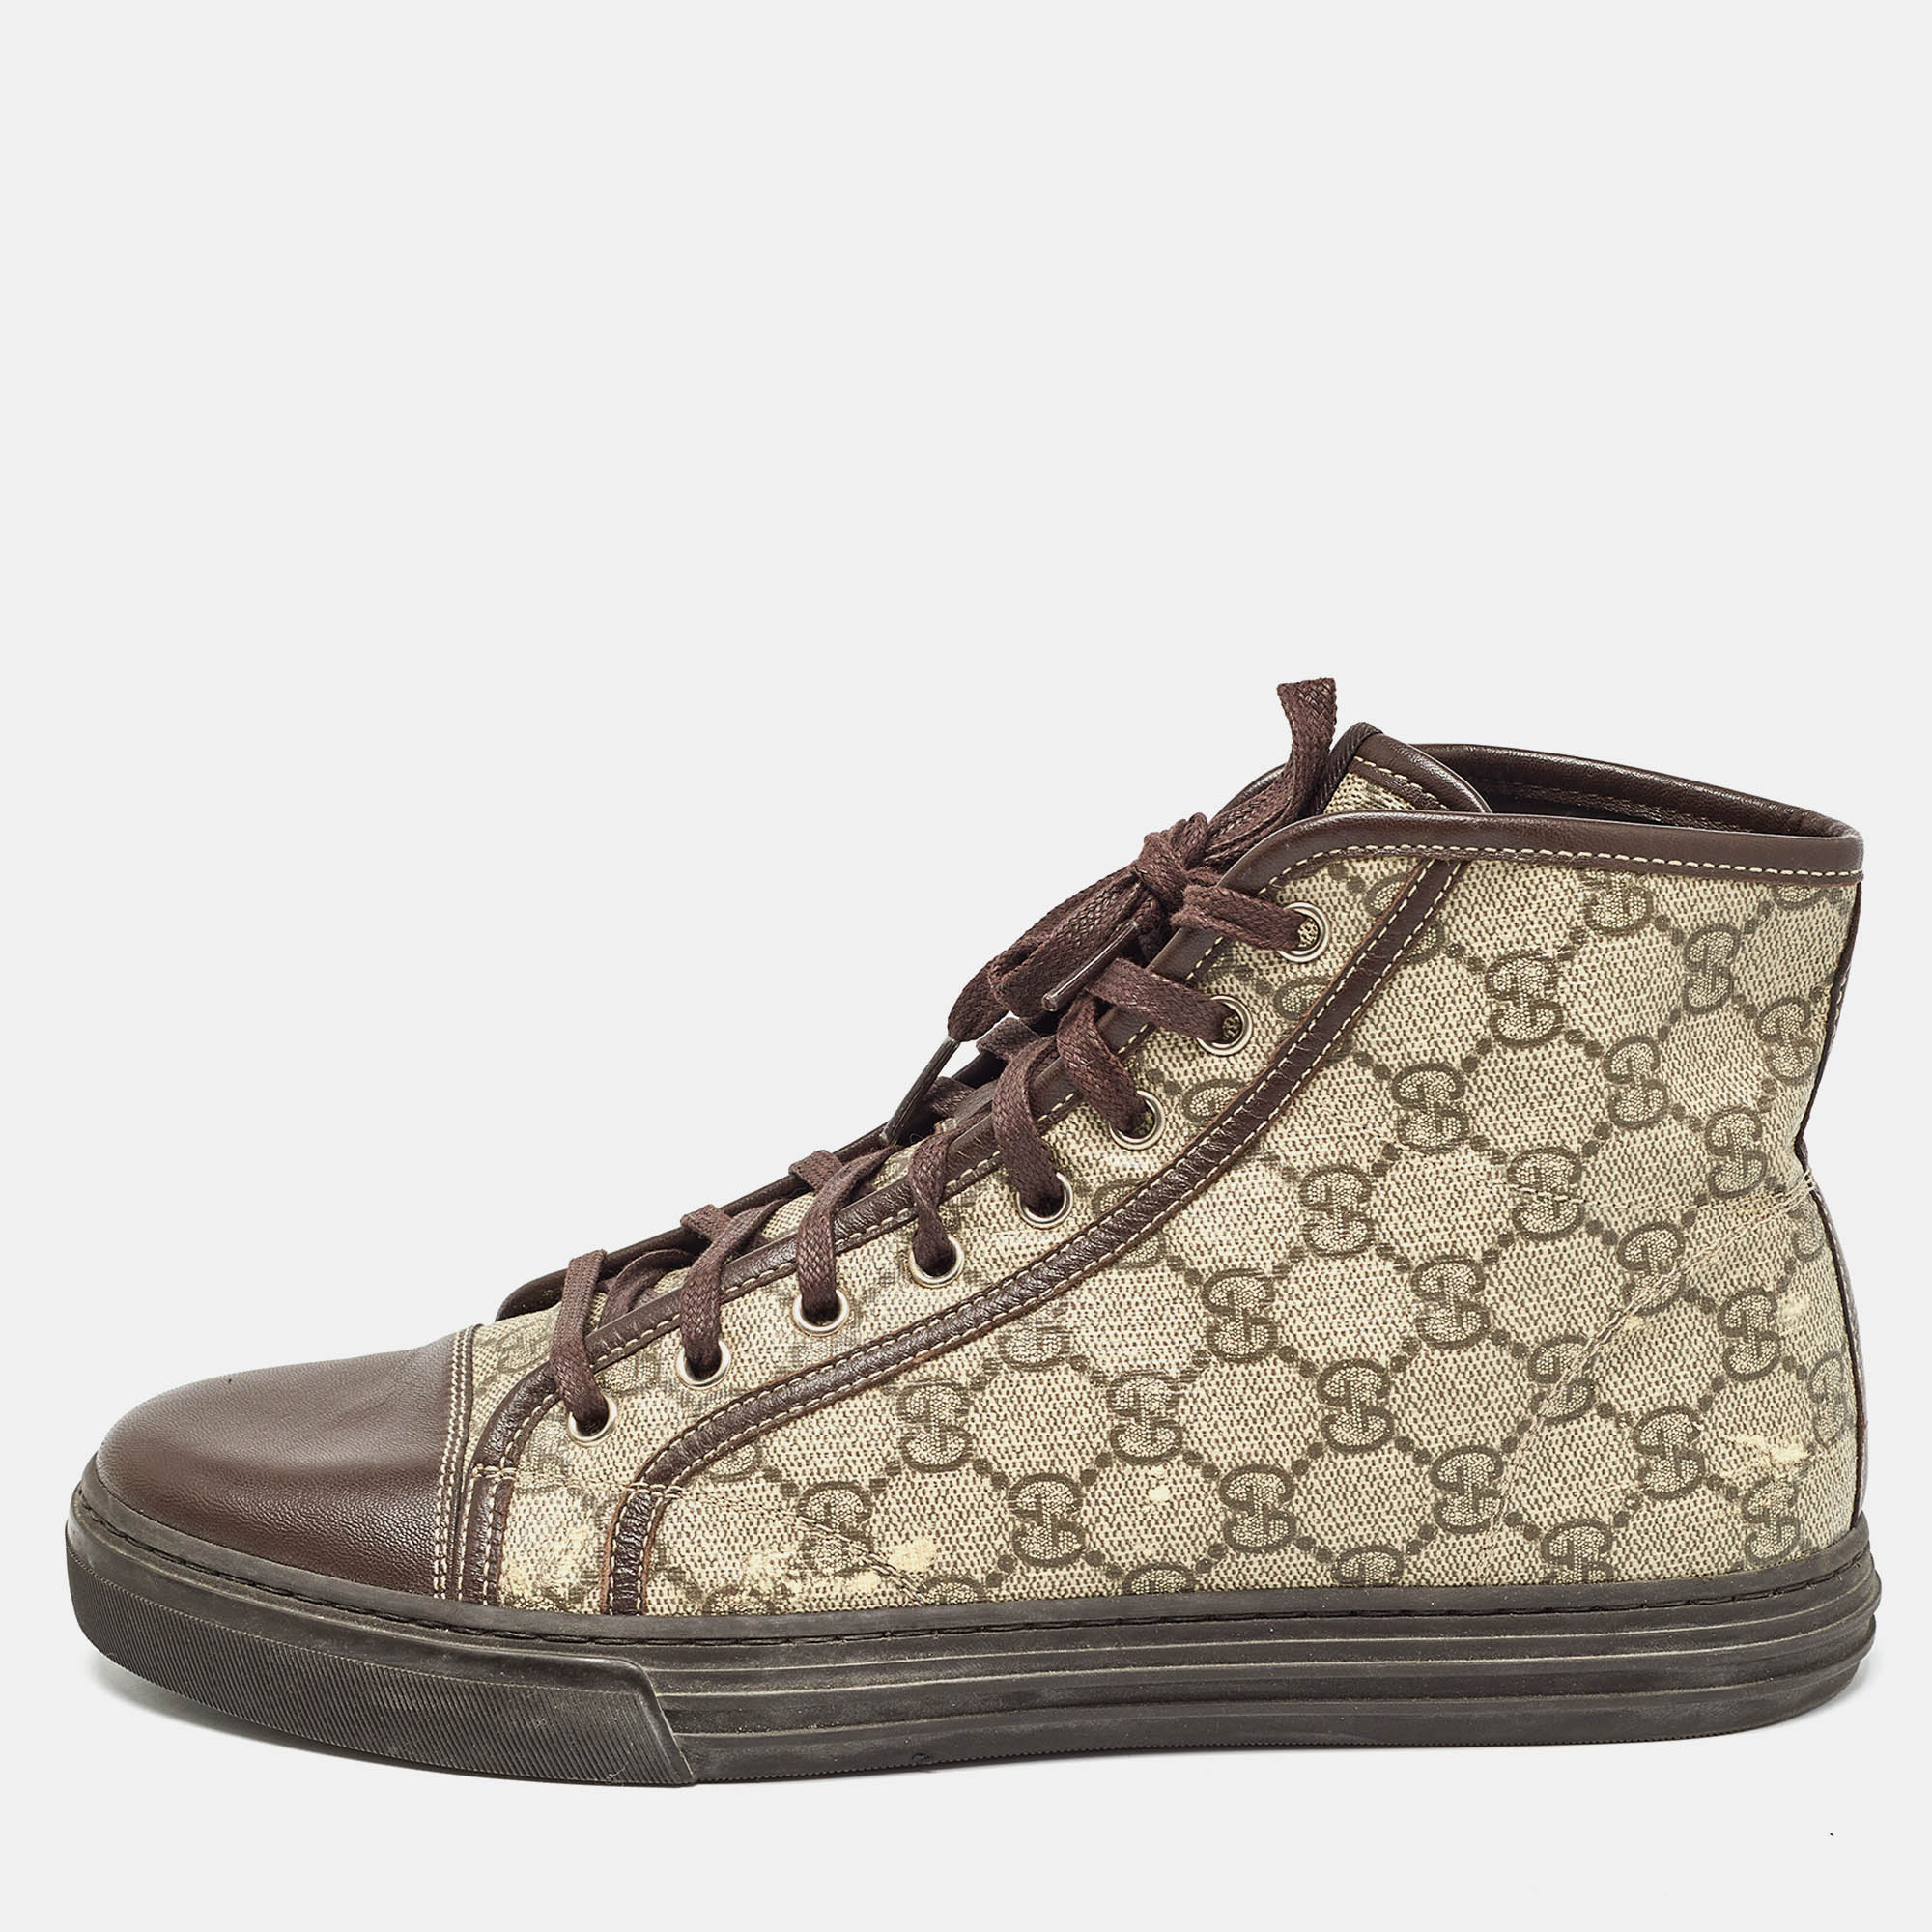 Gucci beige/brown gg supreme canvas and leather high top sneakers size 42